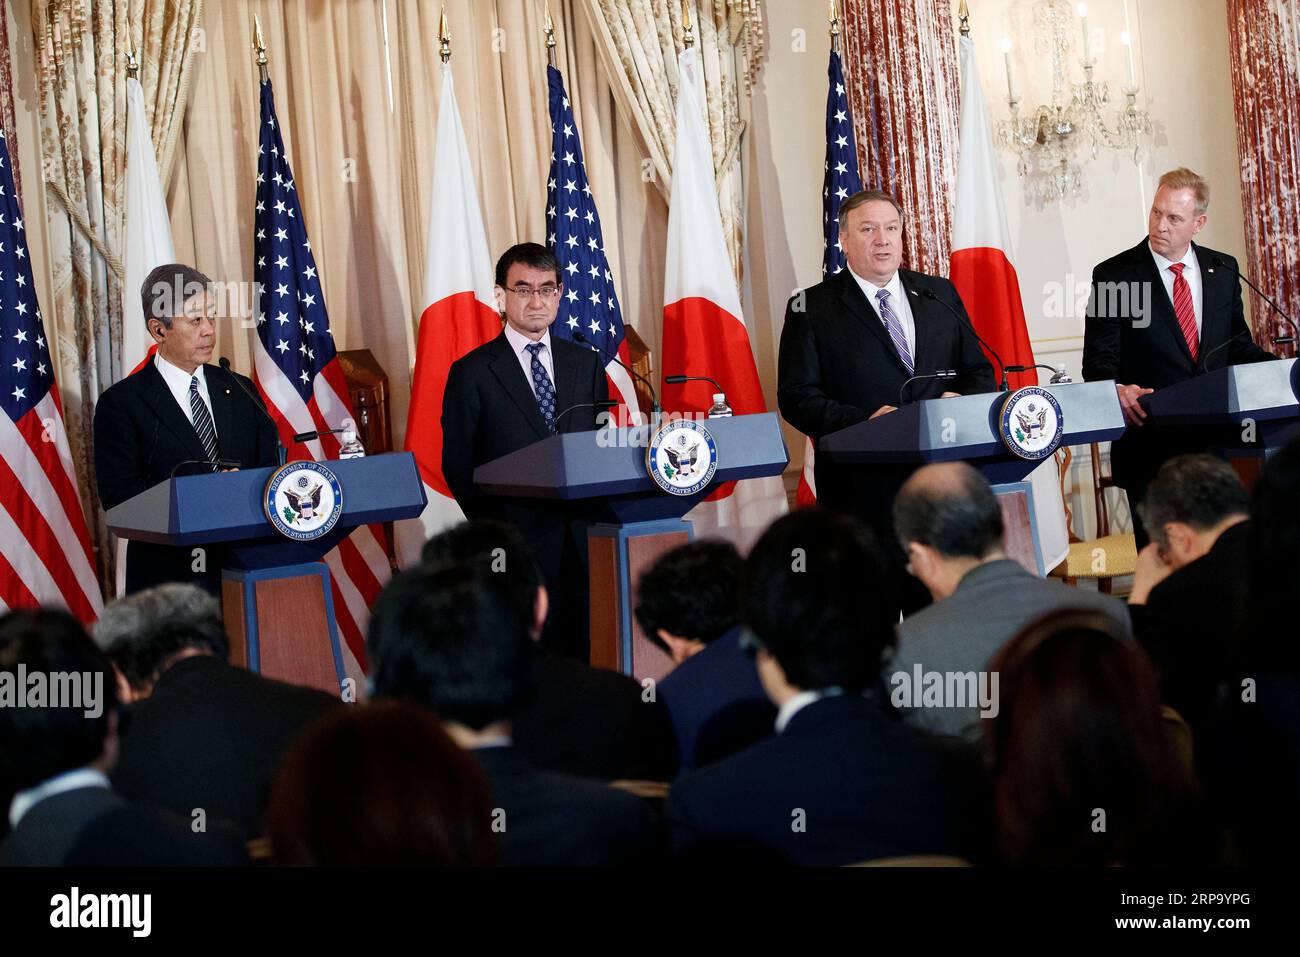 (190420) -- WASHINGTON D.C., April 20, 2019 -- U.S. Secretary of State Mike Pompeo (2nd R), Acting U.S. Secretary of Defense Patrick Shanahan (1st R), Japanese Foreign Minister Taro Kono (2nd L) and Japanese Defense Minister Takeshi Iwaya (1st L) participate in a joint press conference at the State Department in Washington D.C., the United States, on April 19, 2019. U.S. and Japanese senior officials met on Friday in Washington, discussing bilateral relations, cross-domain cooperation and the Korean Peninsula denuclearization, among other issues. ) U.S.-WASHINGTON D.C.-U.S. JAPANESE OFFICIALS- Stock Photo